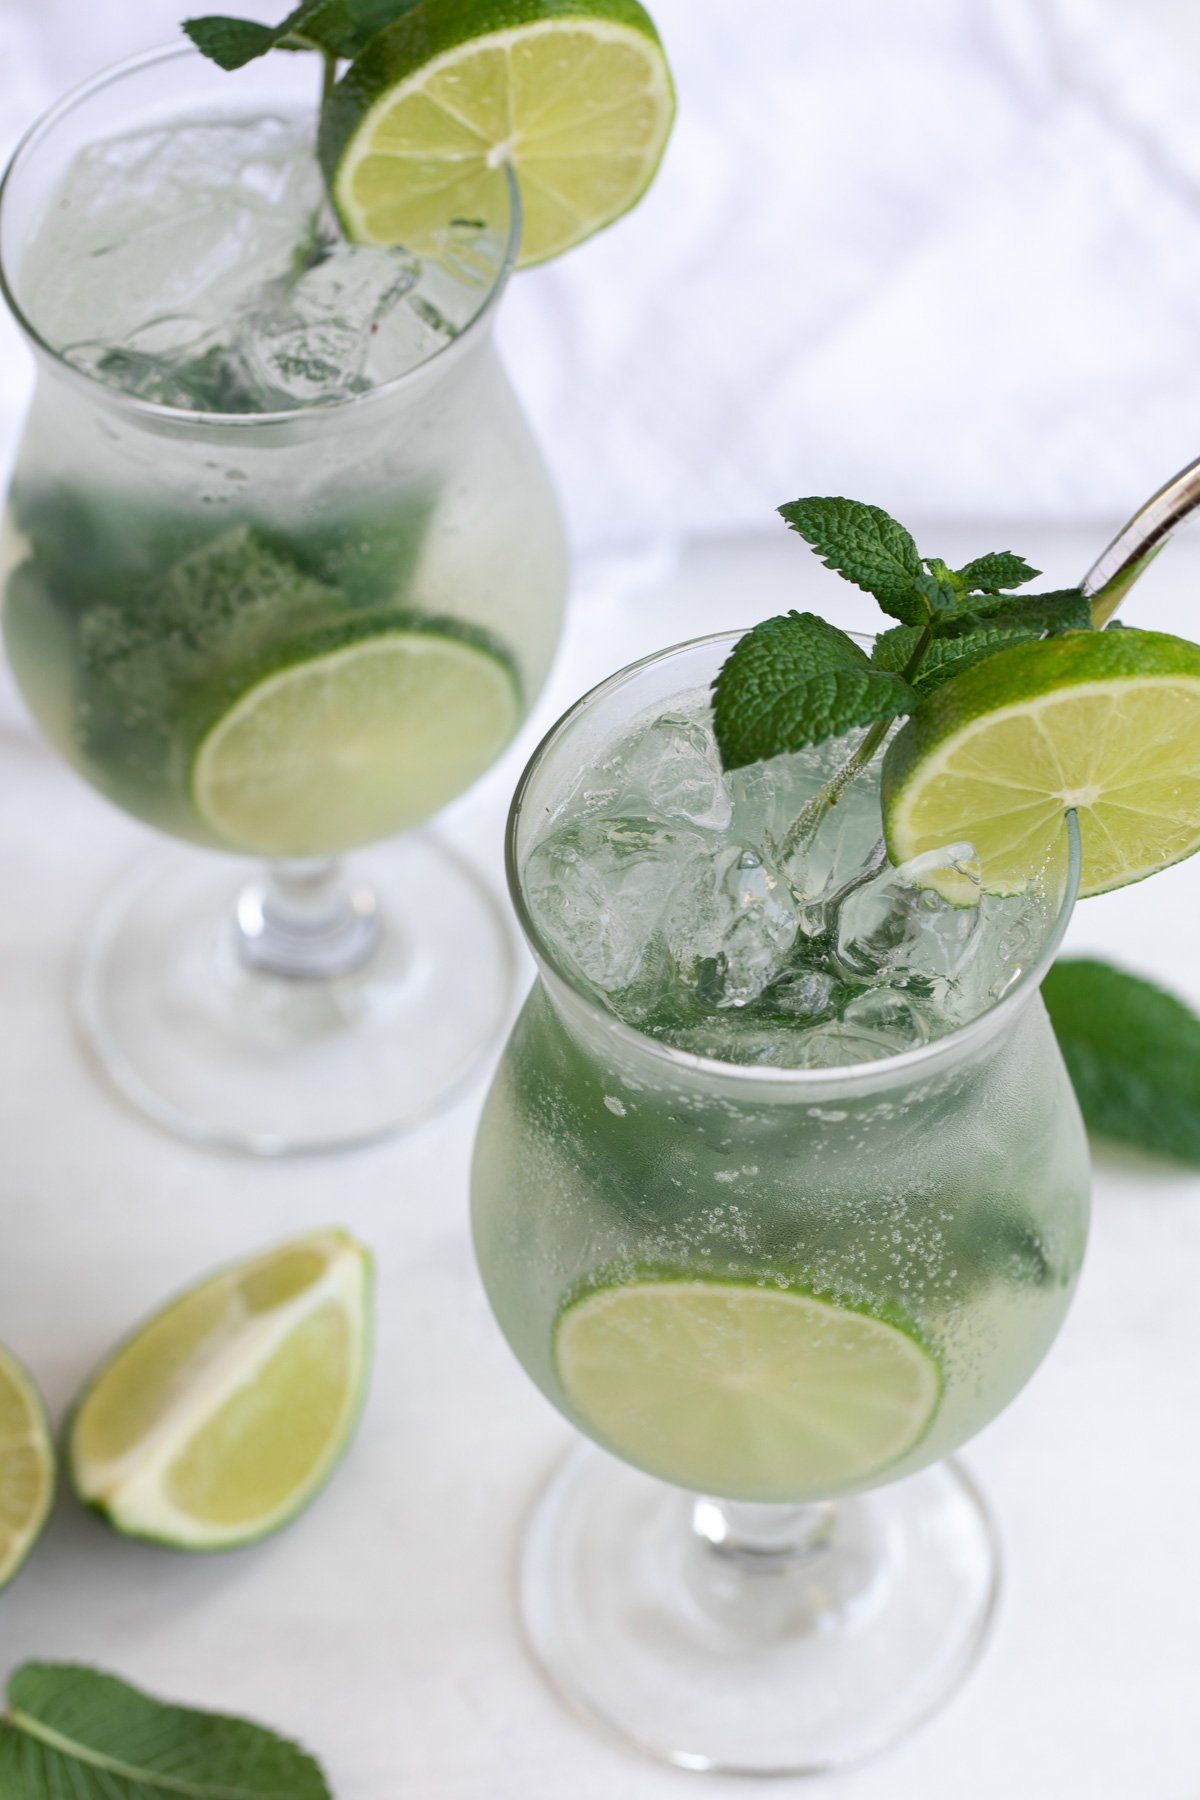 Angled overhead view of two mojito cocktails on a white surface.